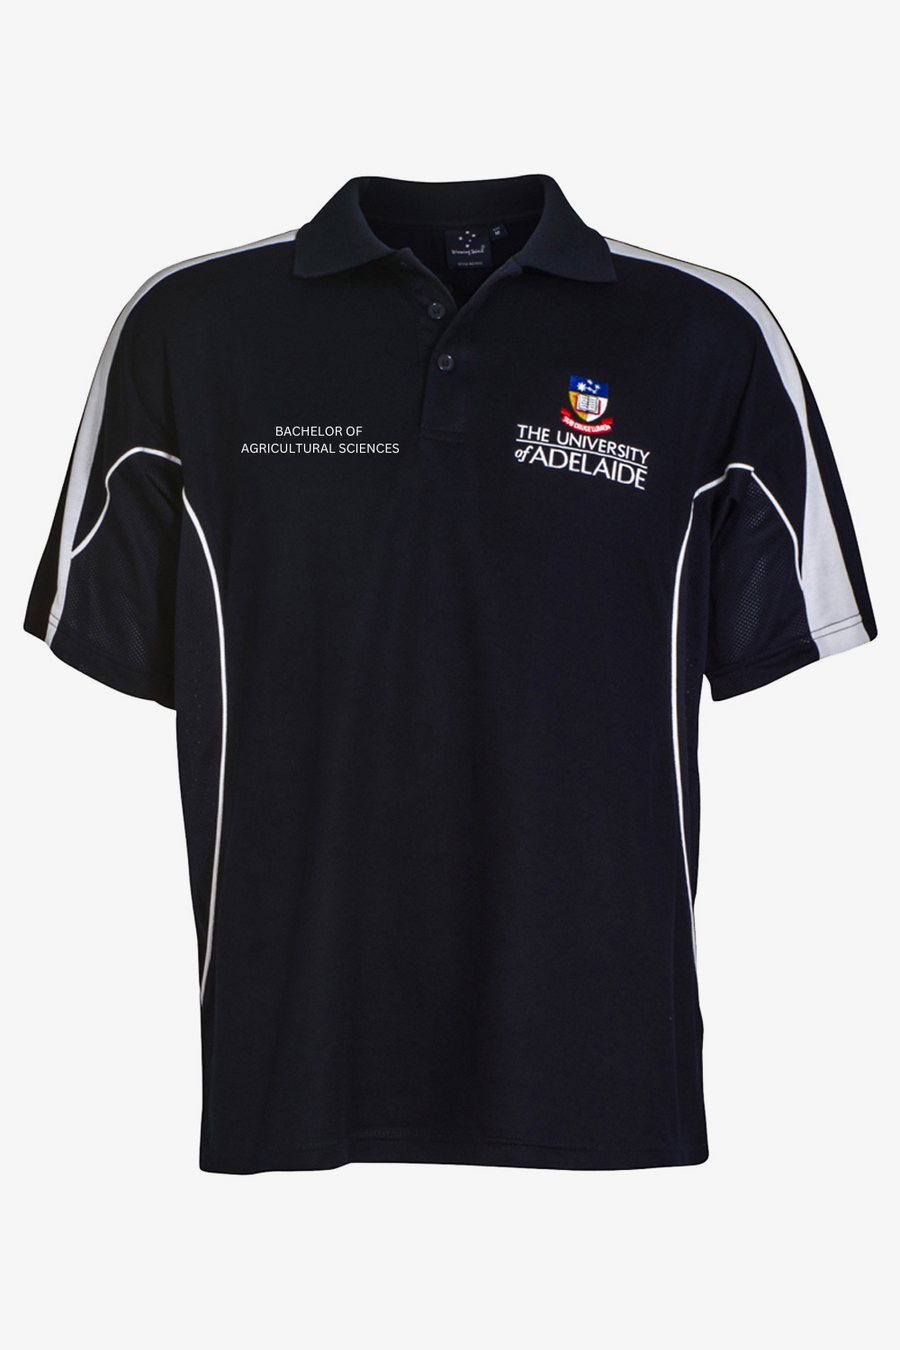 Bachelor of Agricultural Sciences Polo Men's